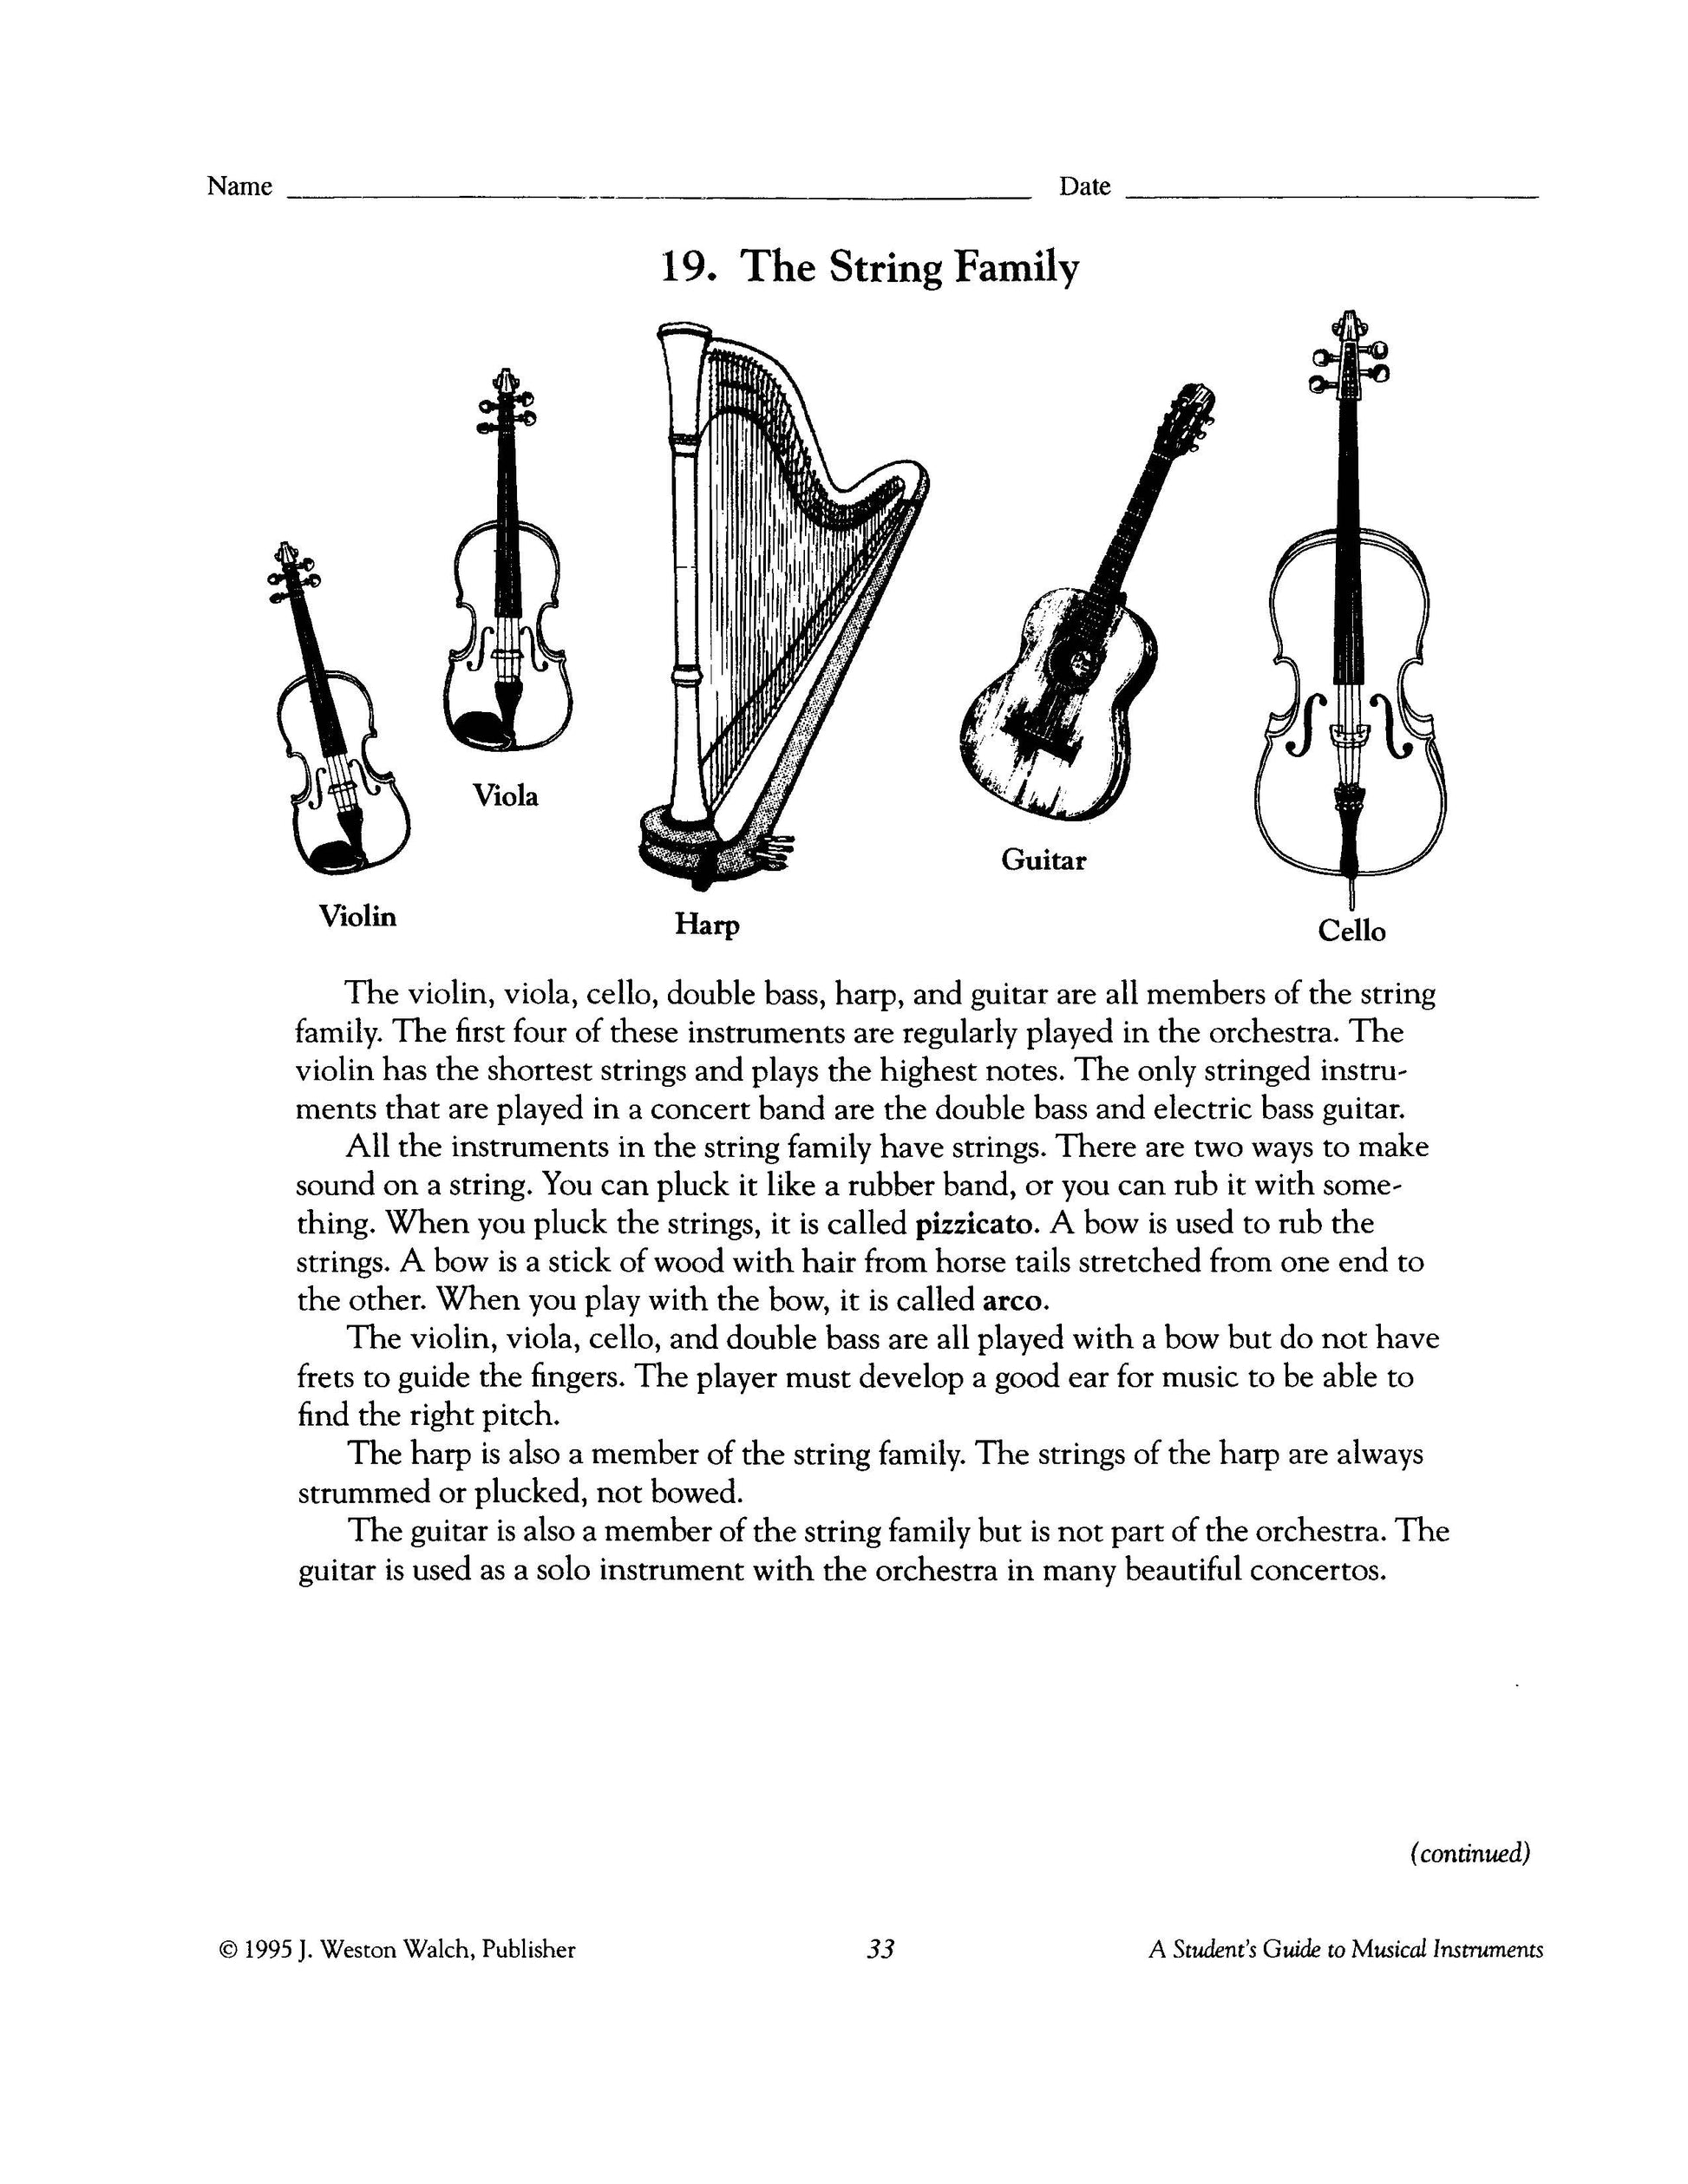 Bright Education Australia, Teacher Resources, Music, Book,A Student's Guide to Musical Instruments